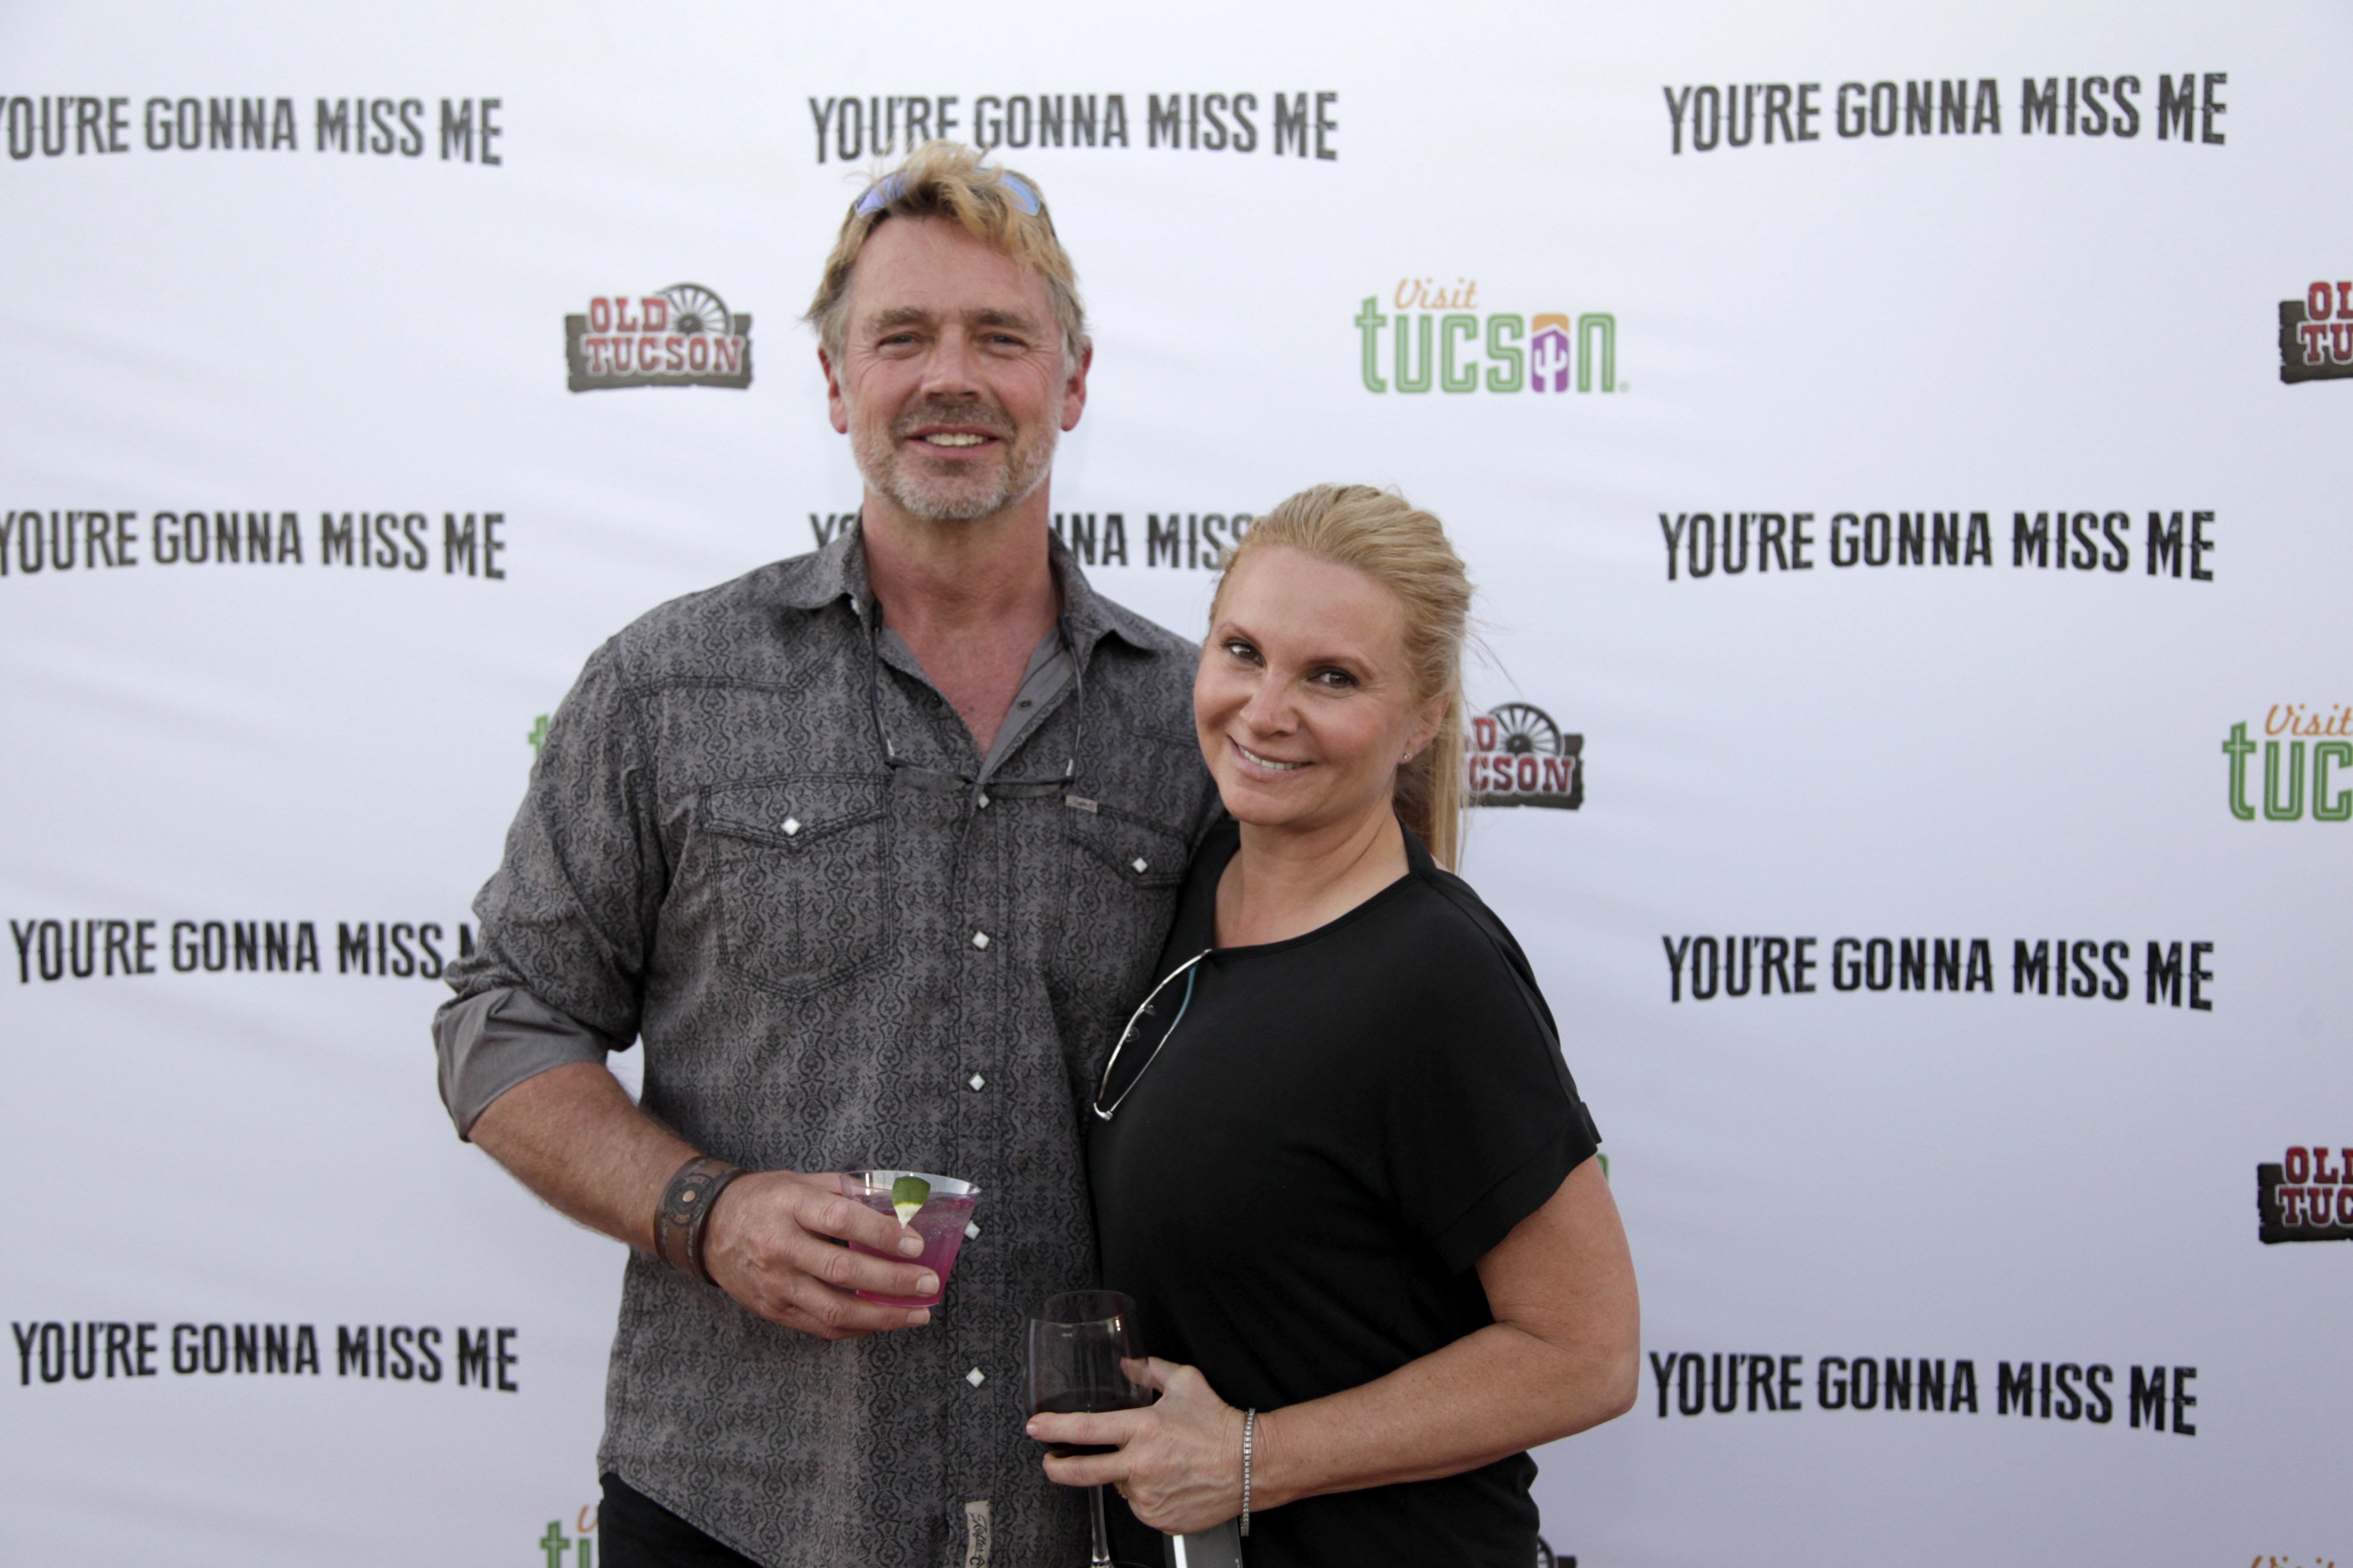 John Schneider and Alicia Allain attend "You're Gonna Miss Me" premiere sponsored by Visit Tucson on May 13, 2017 | Photo: GettyImages